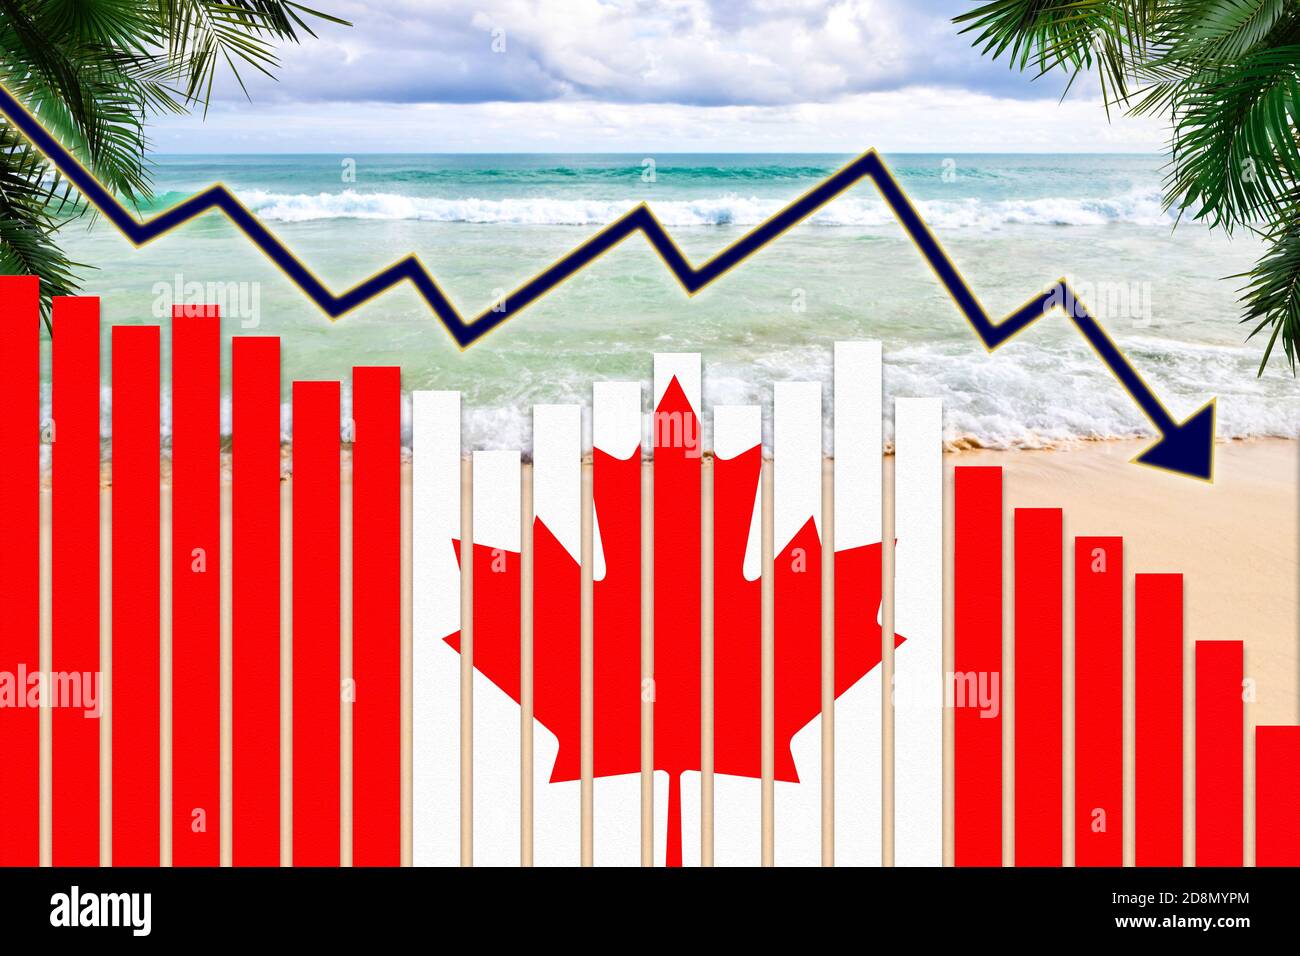 COVID-19 coronavirus pandemic impact on Canada tourism industry concept showing beach background with Canadian flag on bar charts declining trend. Stock Photo